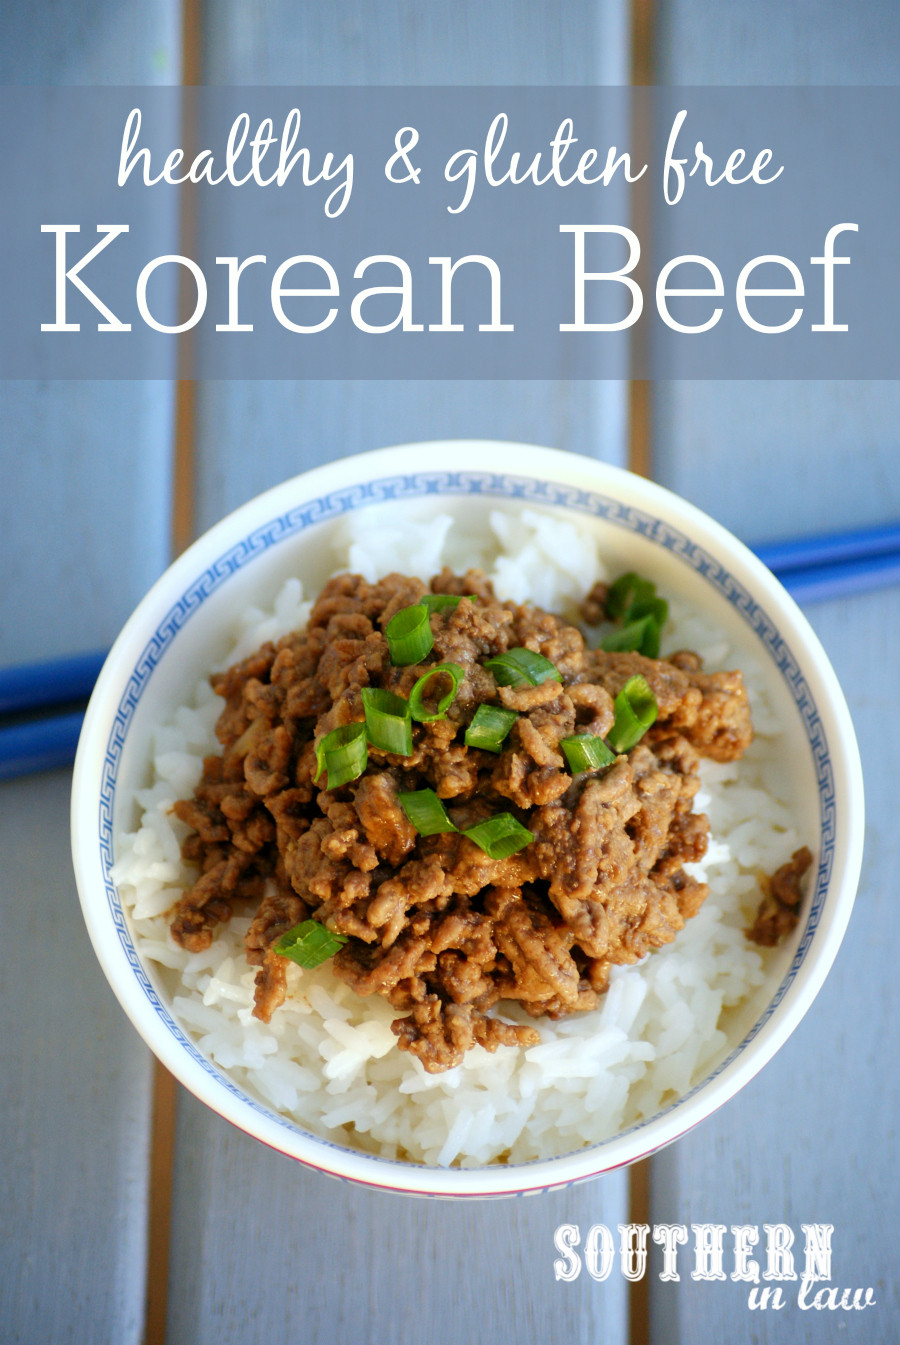 Low Fat Recipes With Ground Beef
 Southern In Law Recipe Healthy Korean Beef Stir Fry